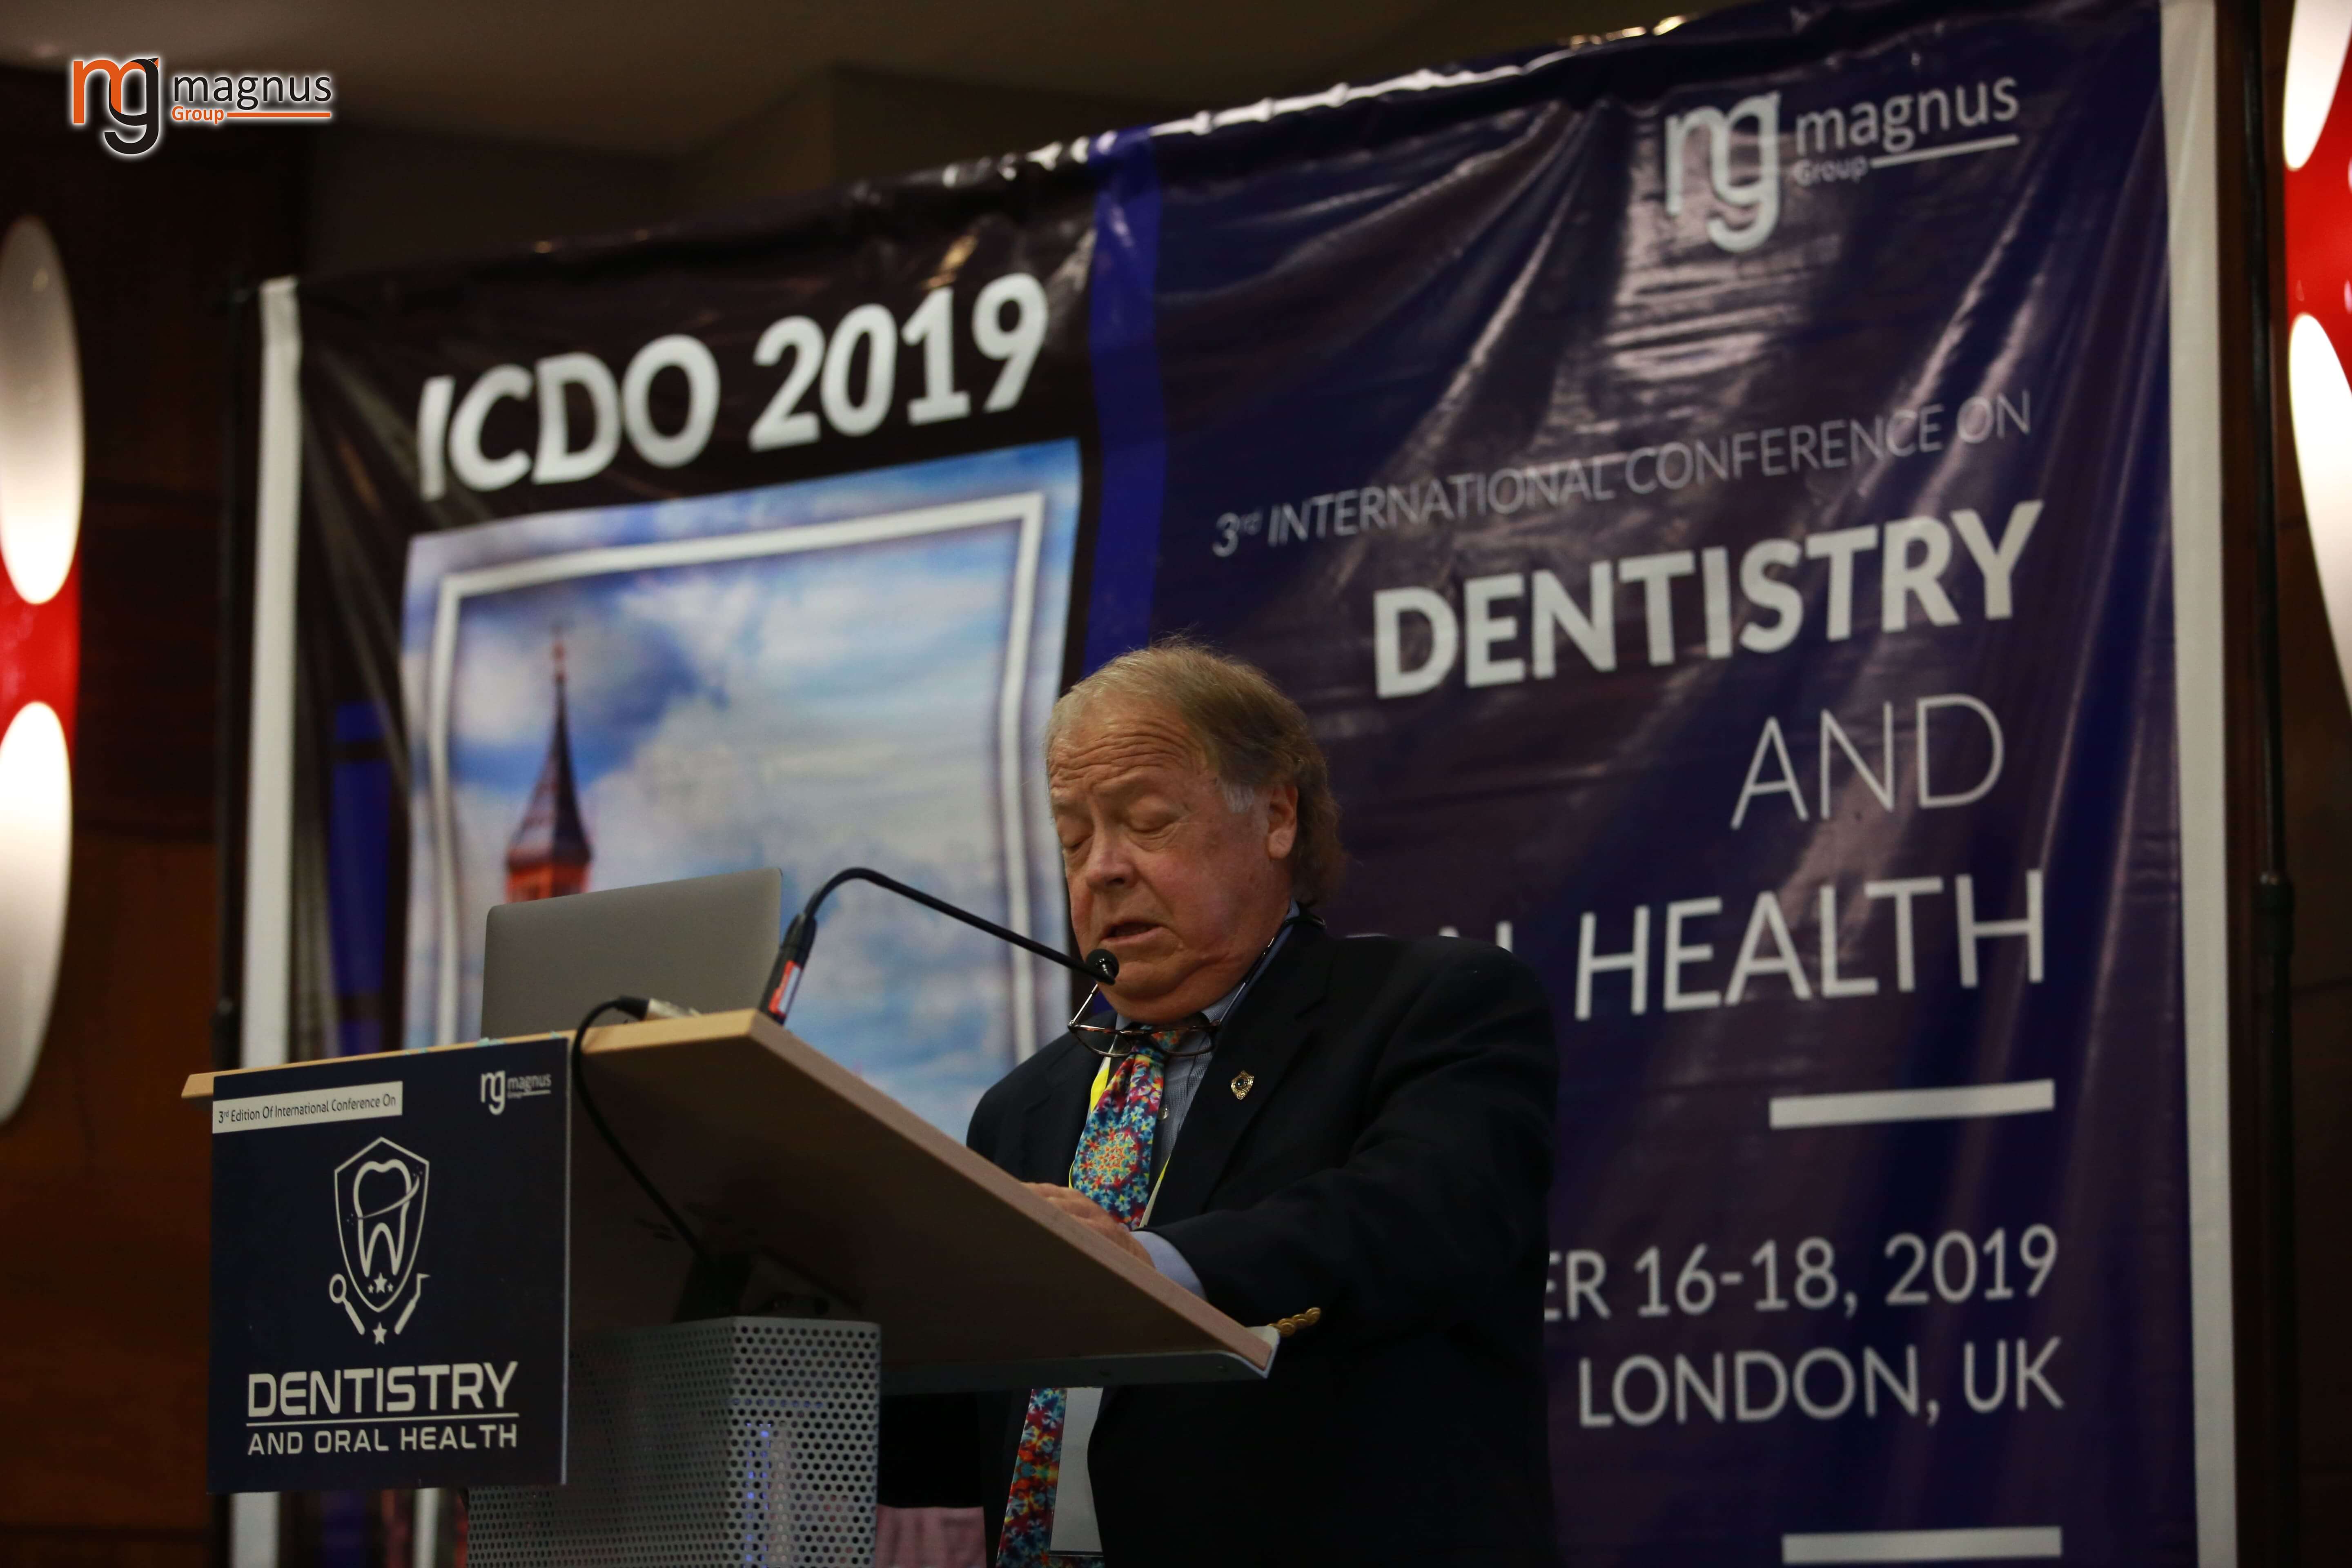 CE Accredited Dental Conferences